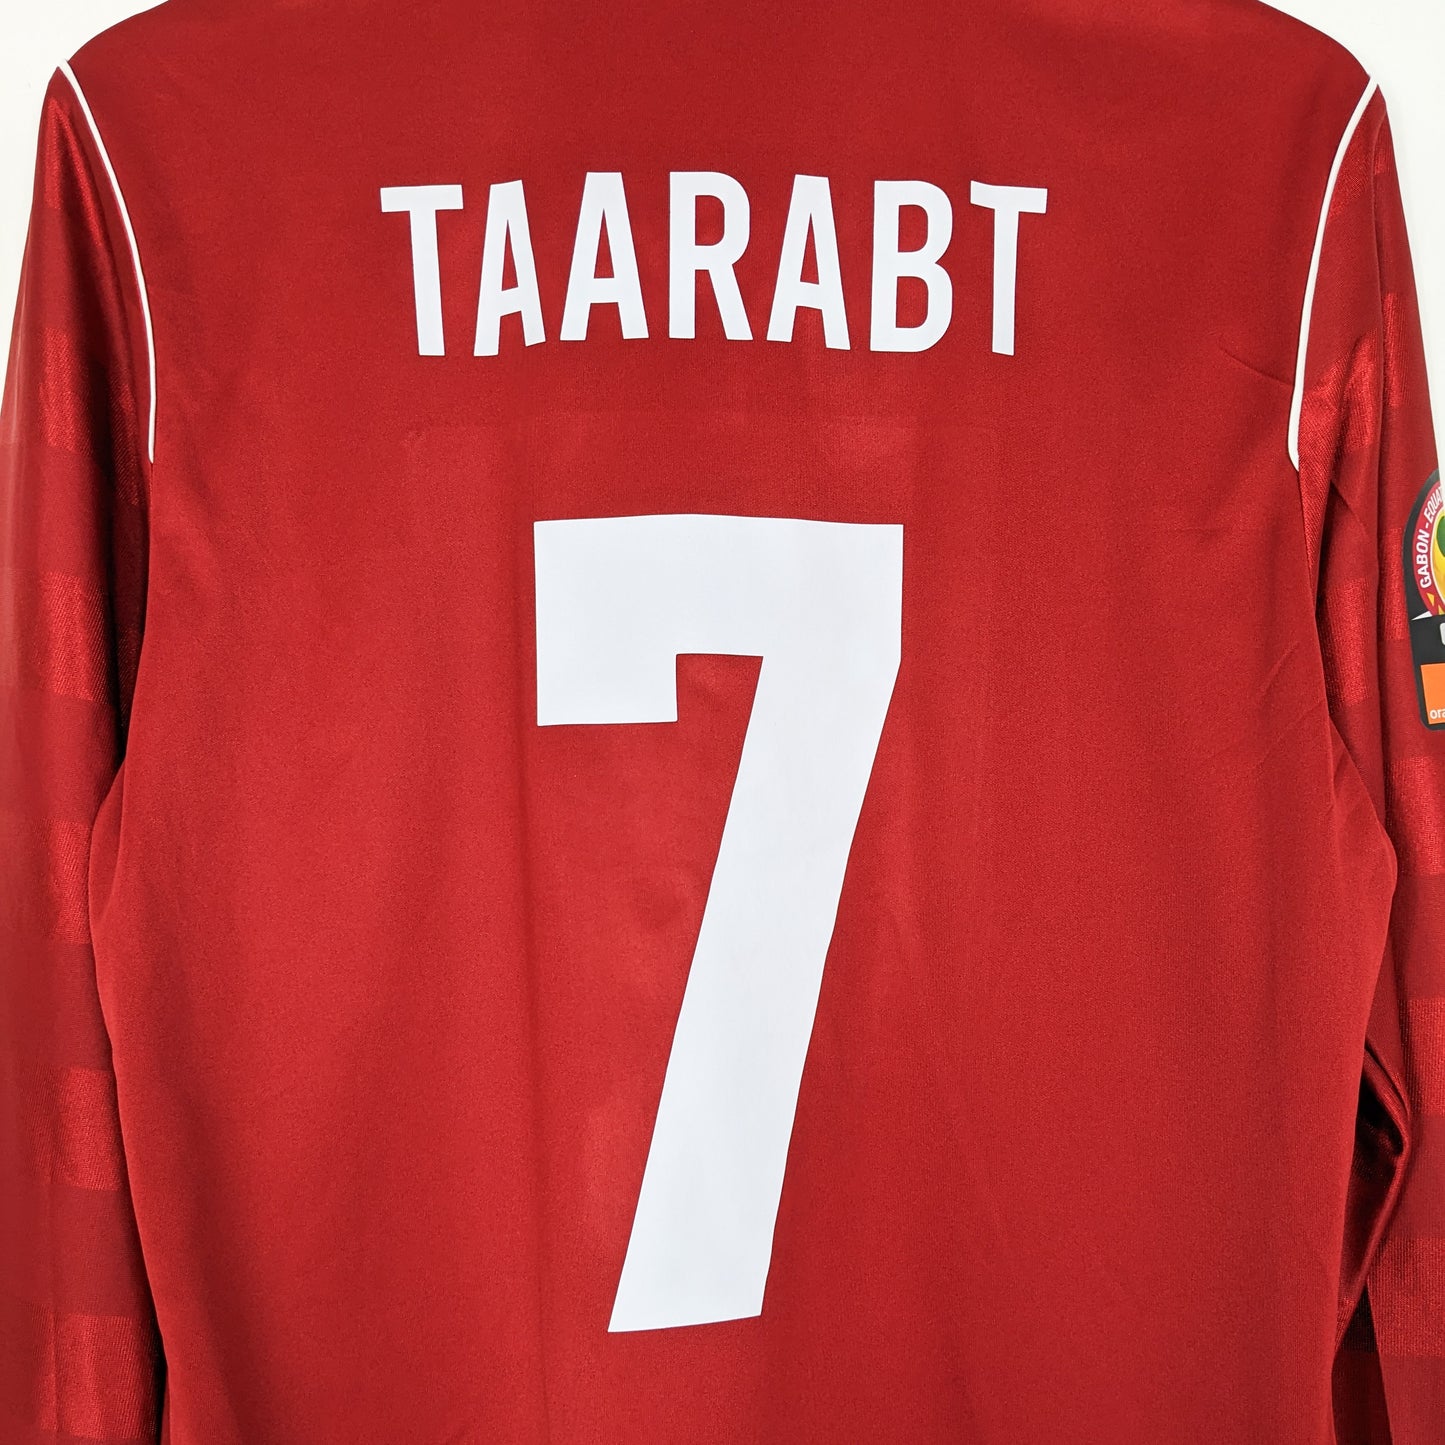 Authentic Morocco 2012 Home - Taraabt #7 Size M